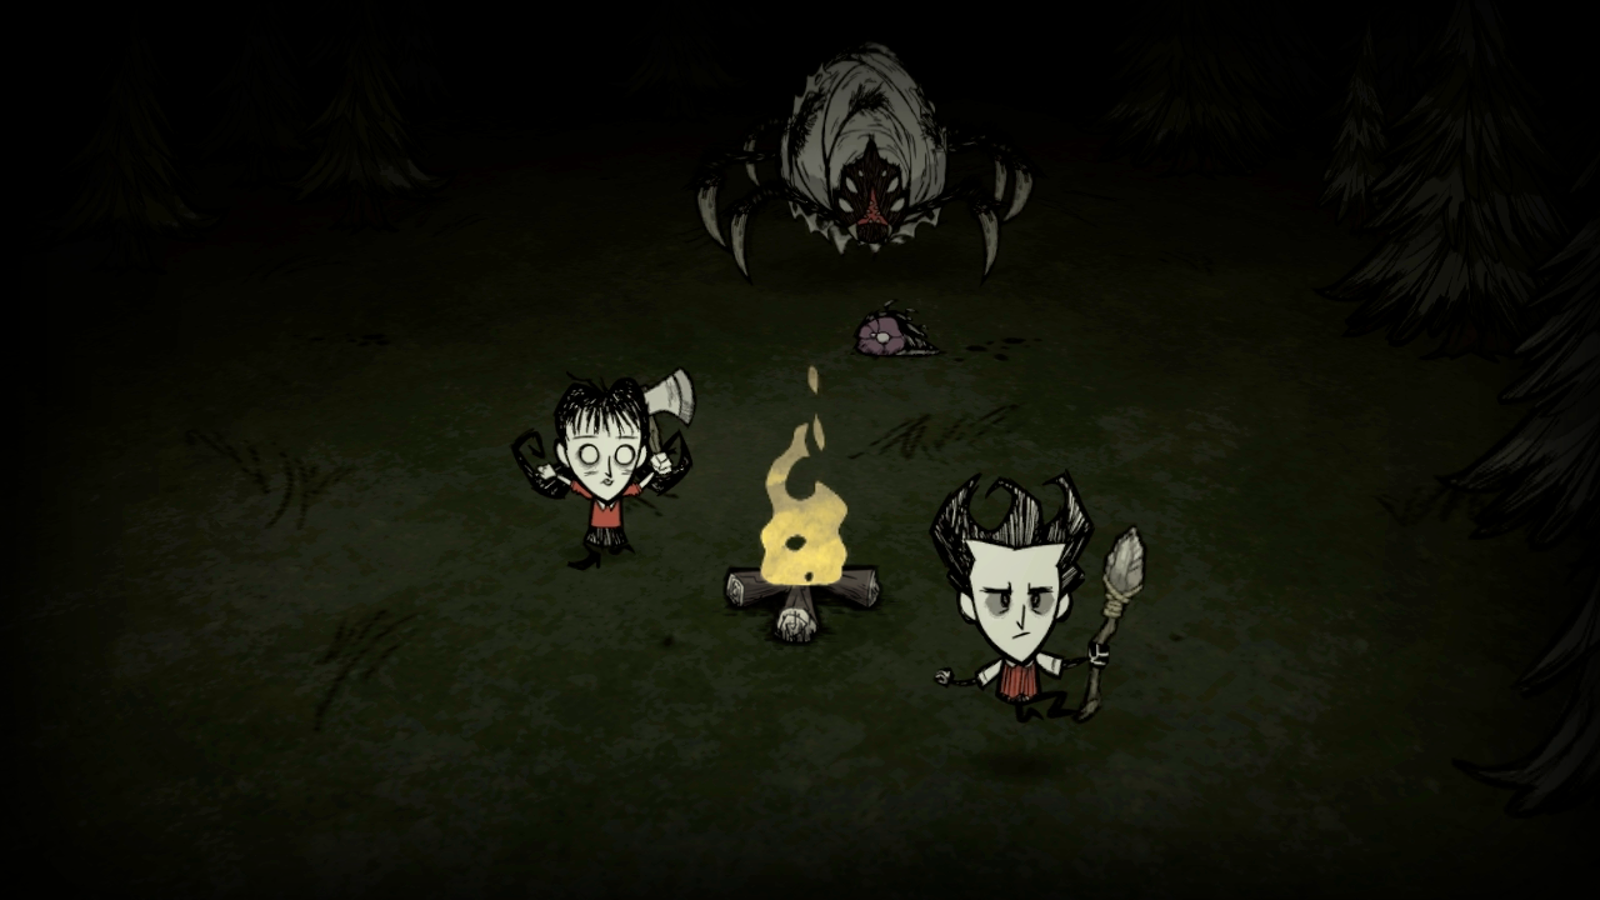 Dont le. Донт Стар тугезе. Don't Starve together ПС 4. Казан don't Starve together. Енот don't Starve together.